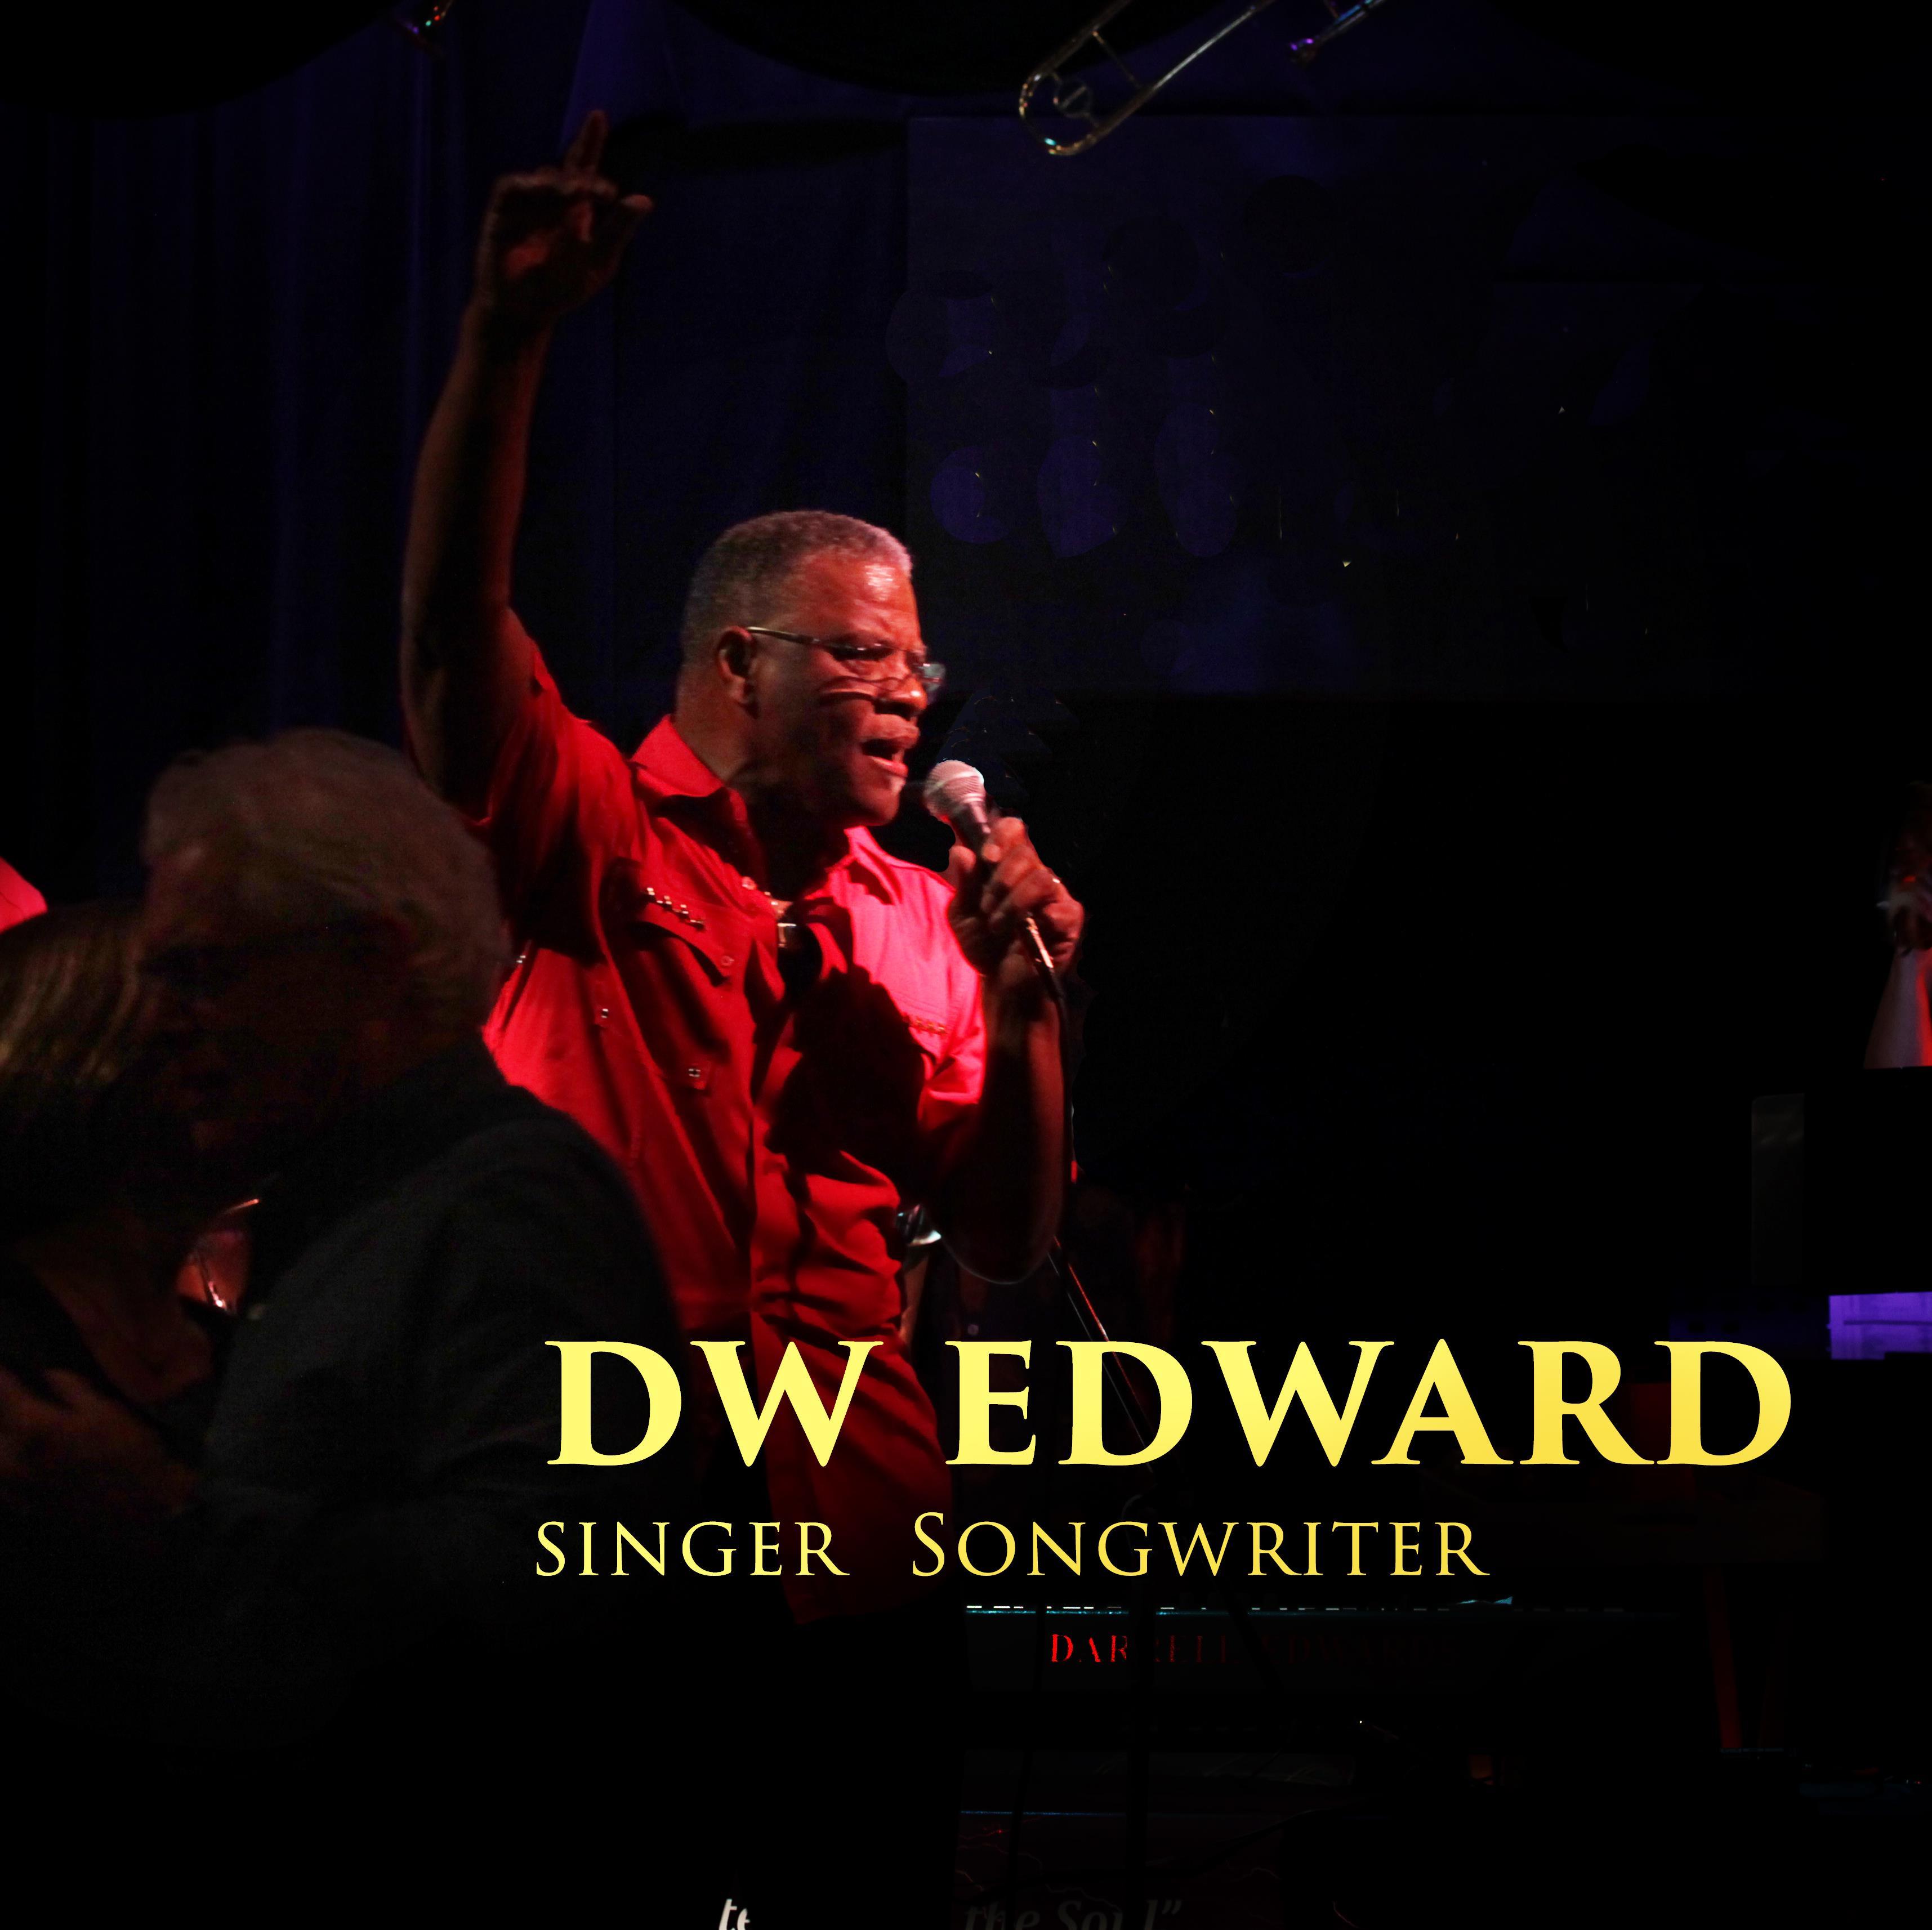 Darrell Edwards, (aka DW EDWARDS)Singer, Songwriter, and Musician, was influenced by music icons such as Pop & Mavis Staples, Al Green, Elvis Presley, and more.